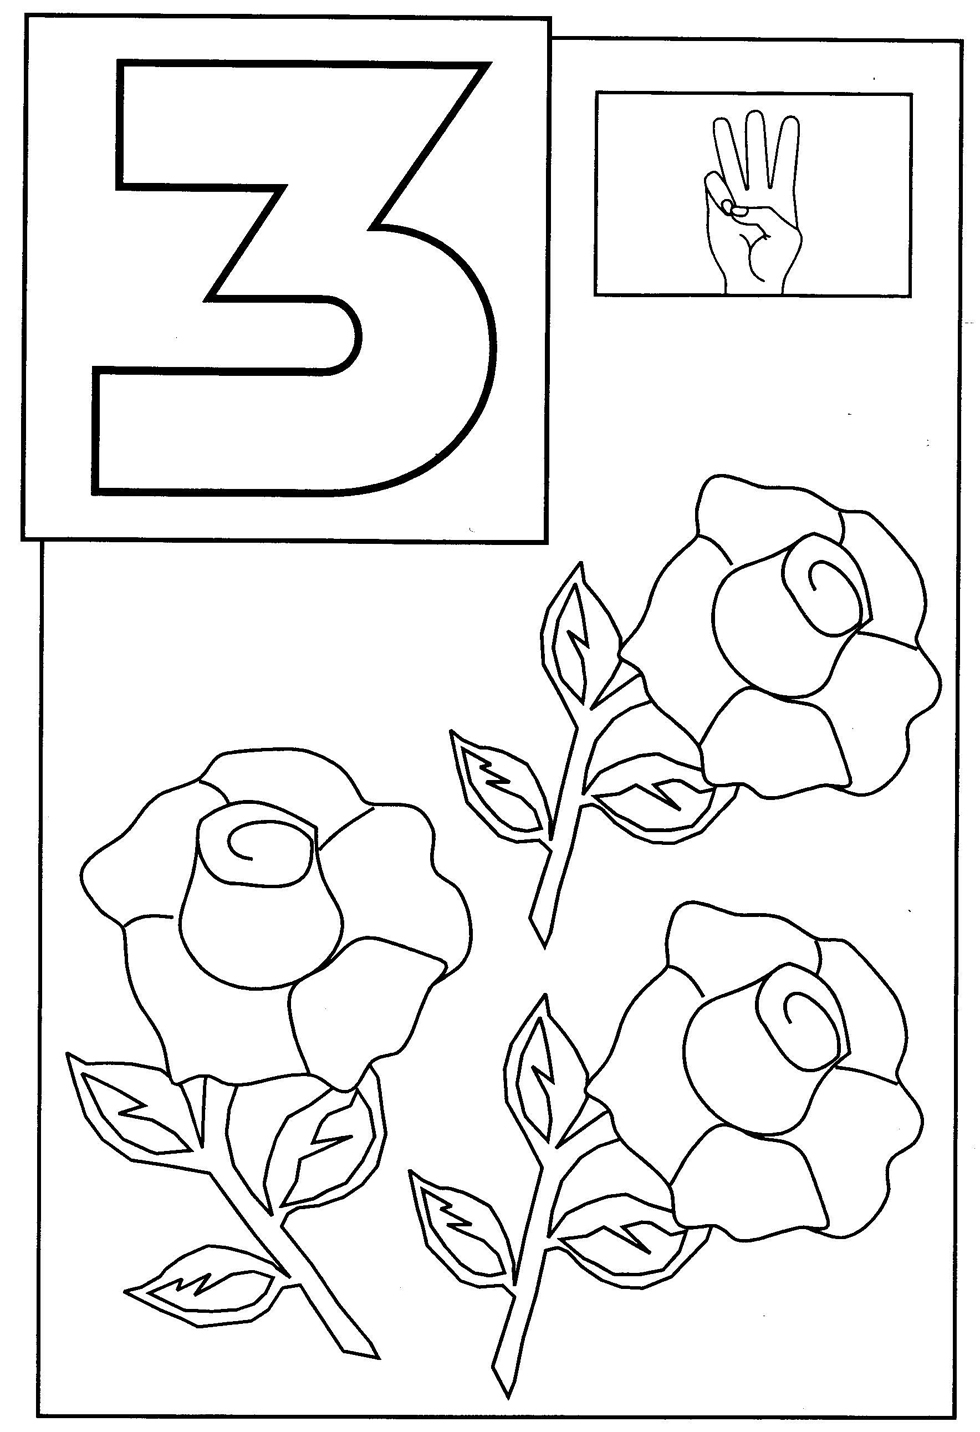 Ashley Coloring Pages at GetColorings.com | Free printable ...